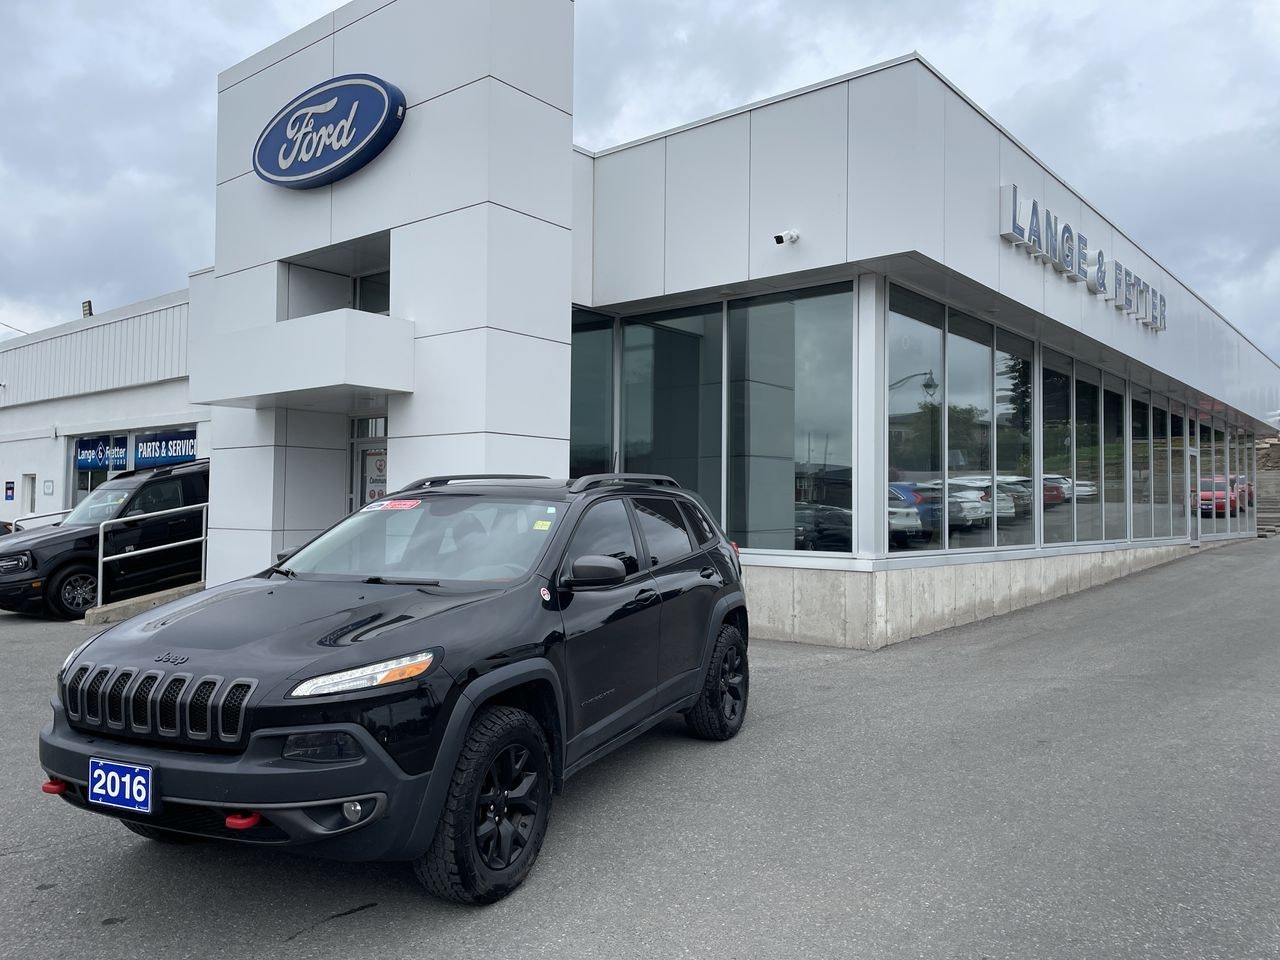 2016 Jeep Cherokee - P21241A Full Image 1